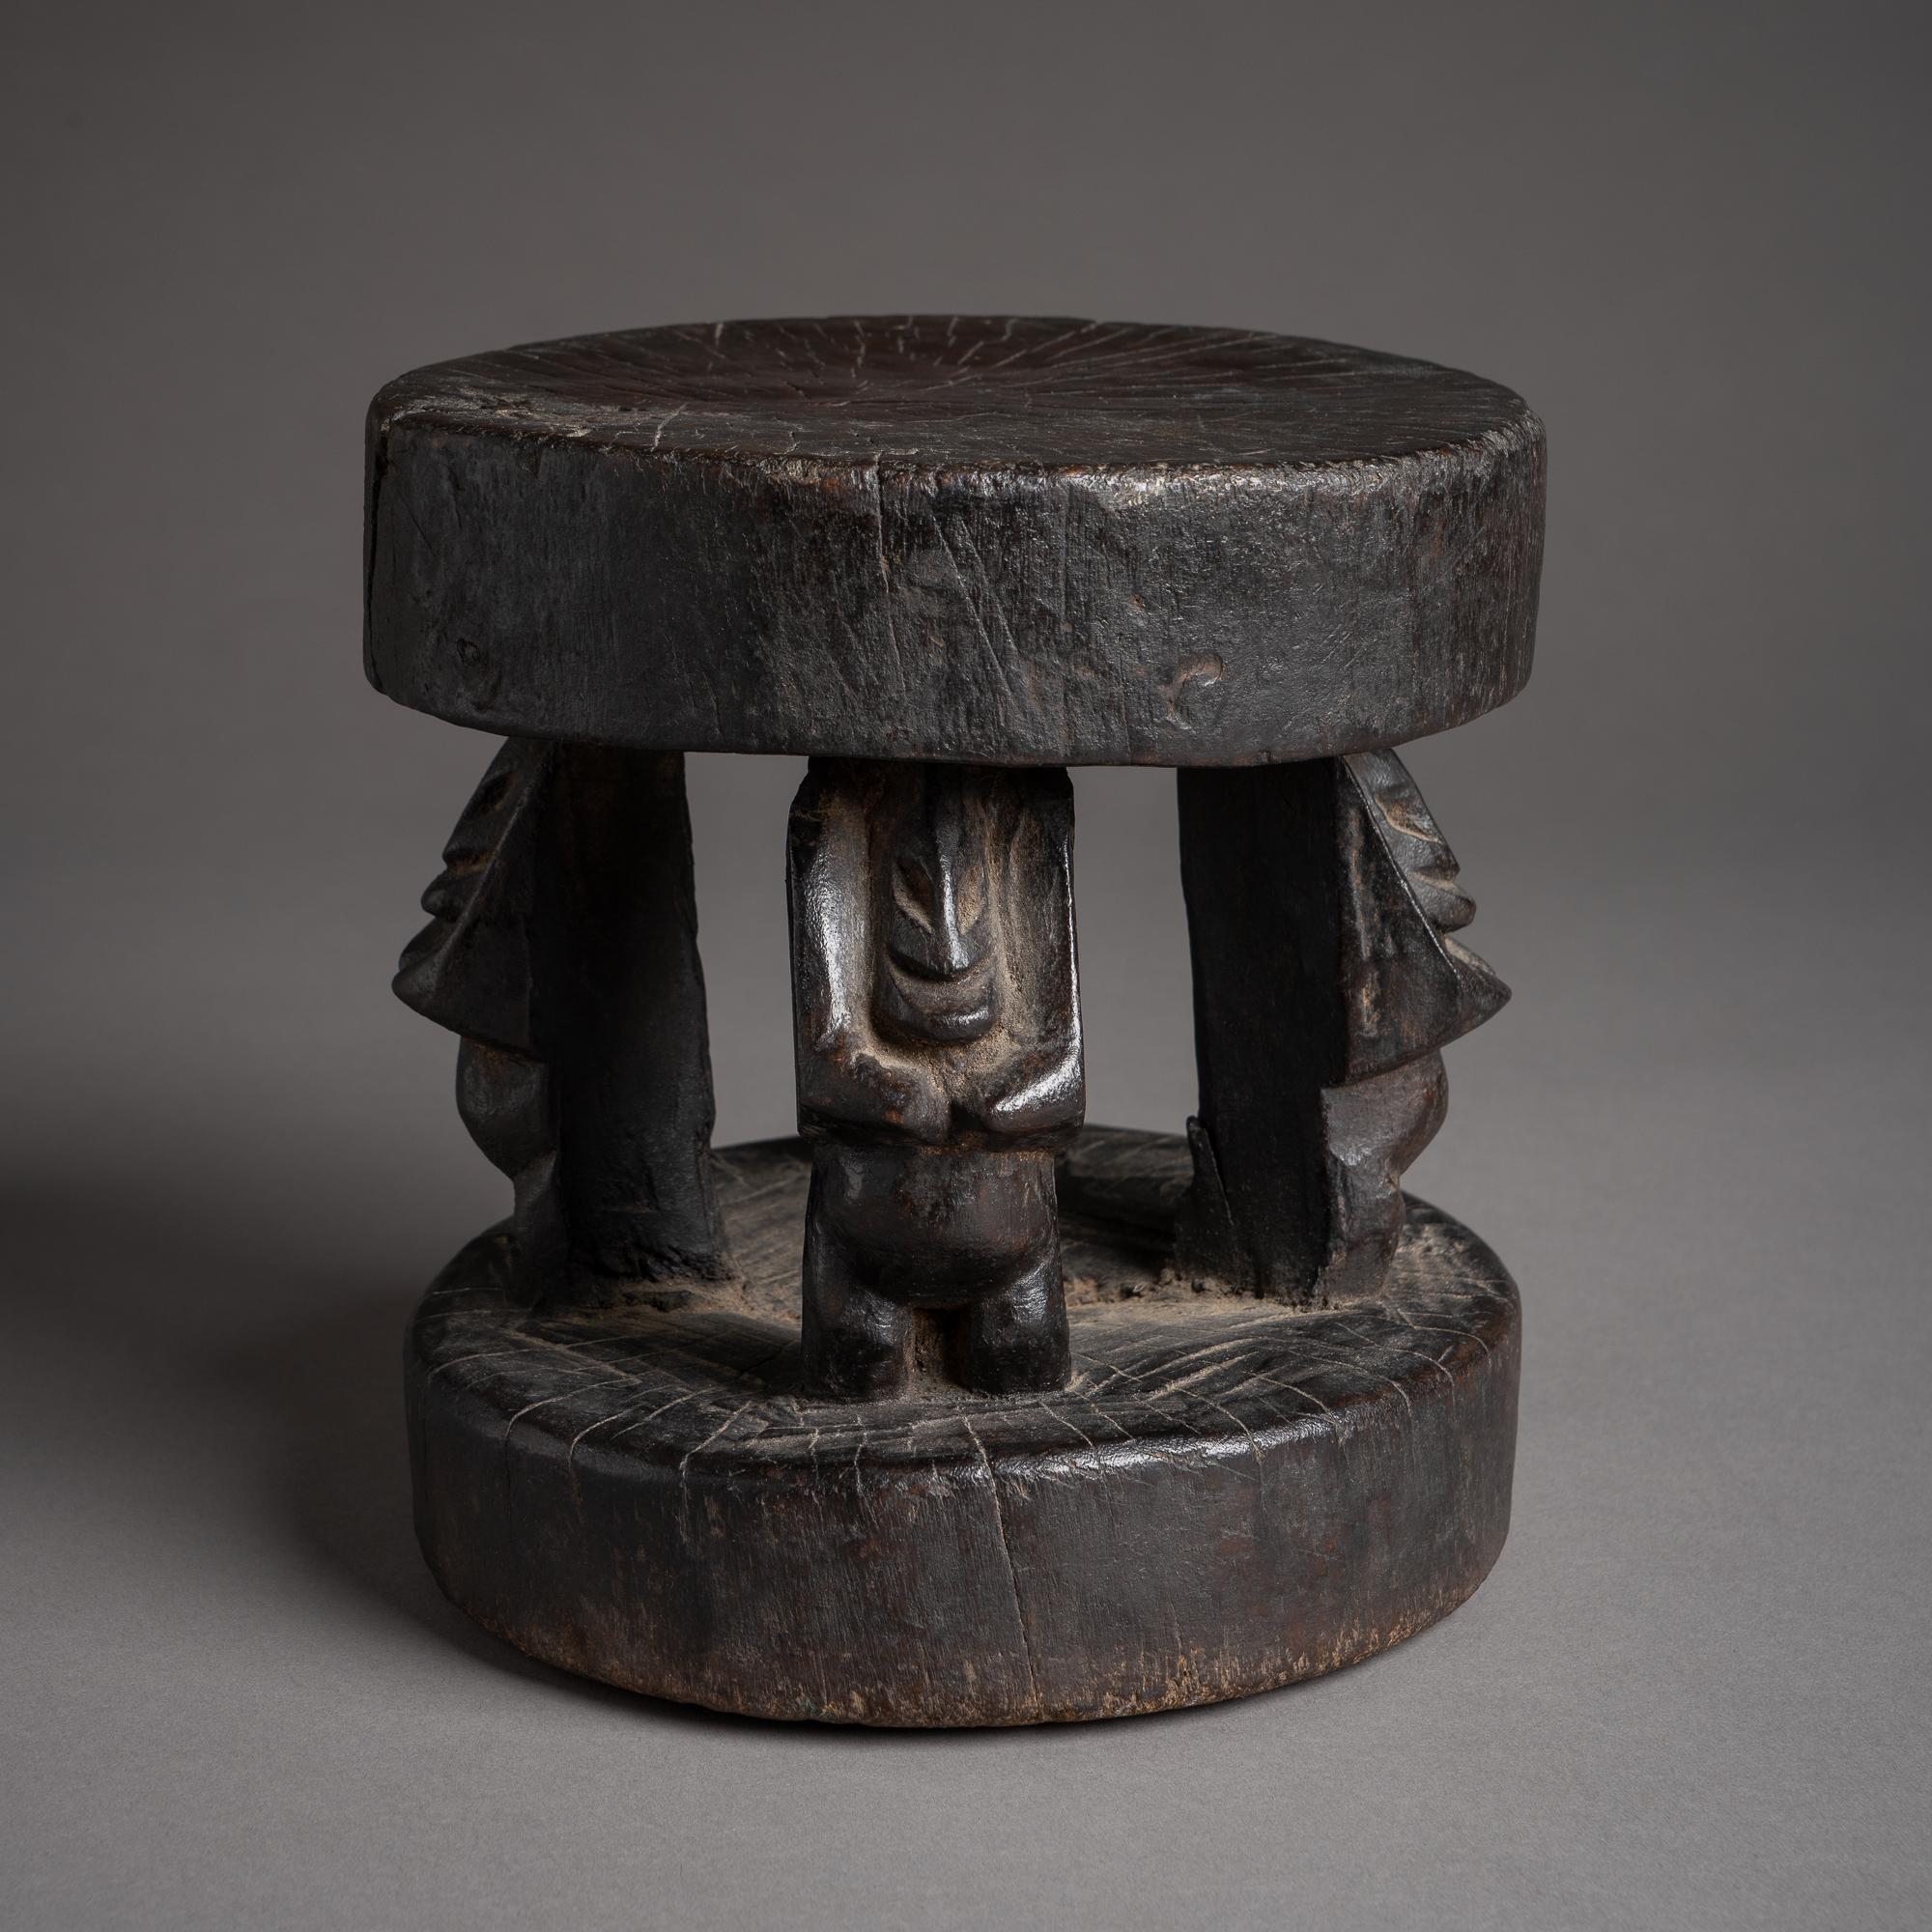 Stout, strong proportions and a dark patina give this figural stool a powerful sculptural presence. In contrast with the elongated, more naturalistic body forms found in the most detailed Dogon stools, the figures here are more abstract and compact,